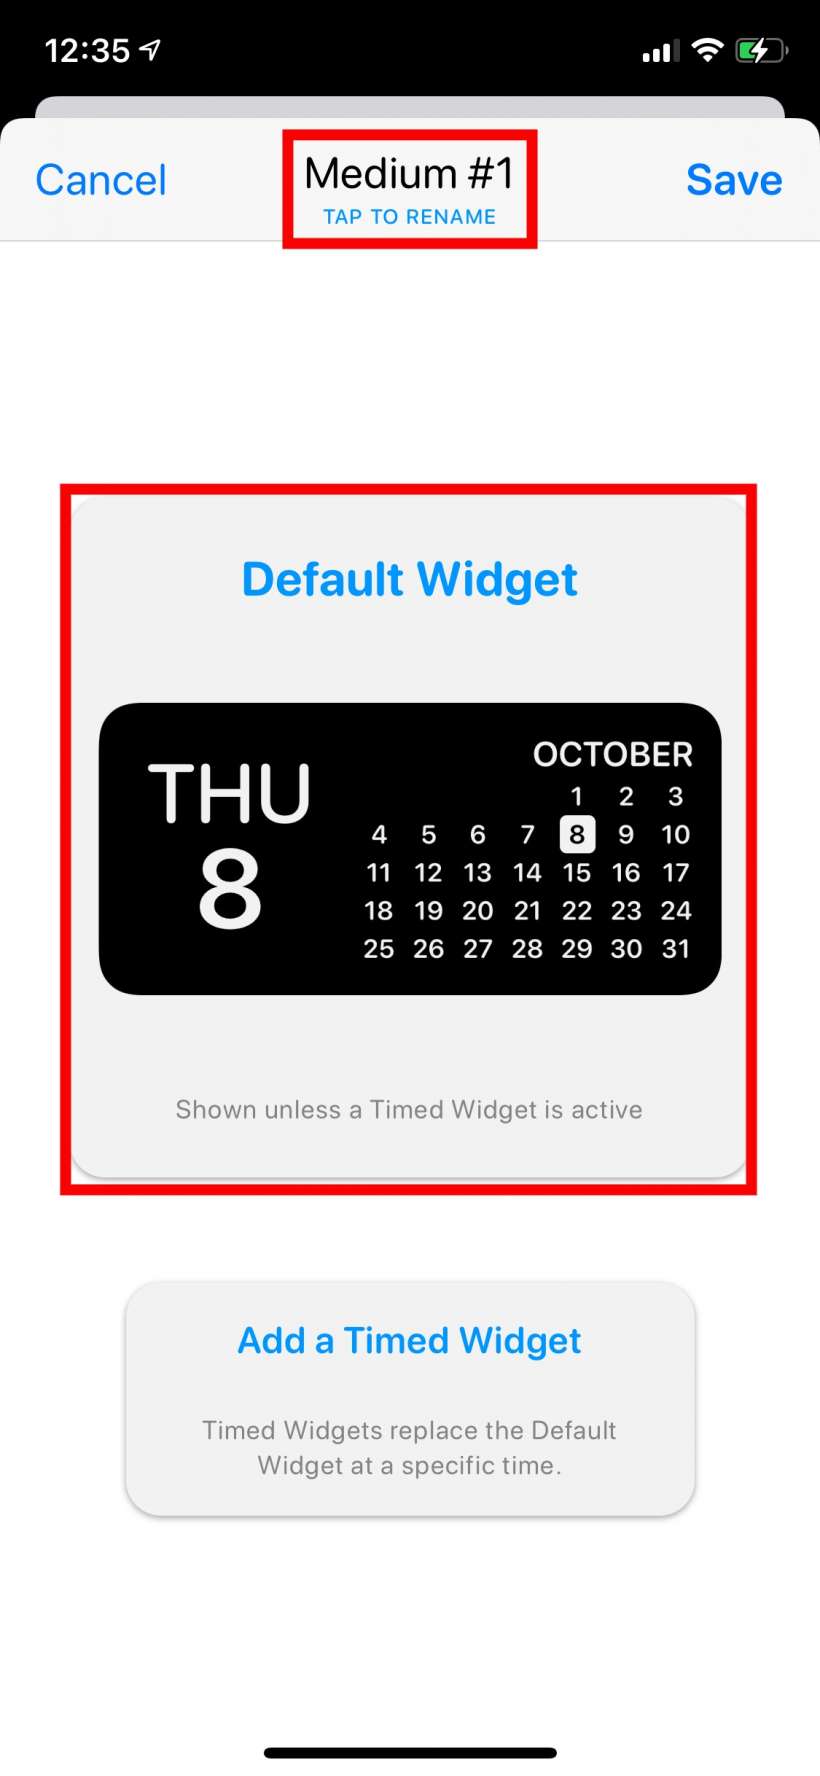 How to customize and personalize iPhone and iPad widgets with Widgetsmith.